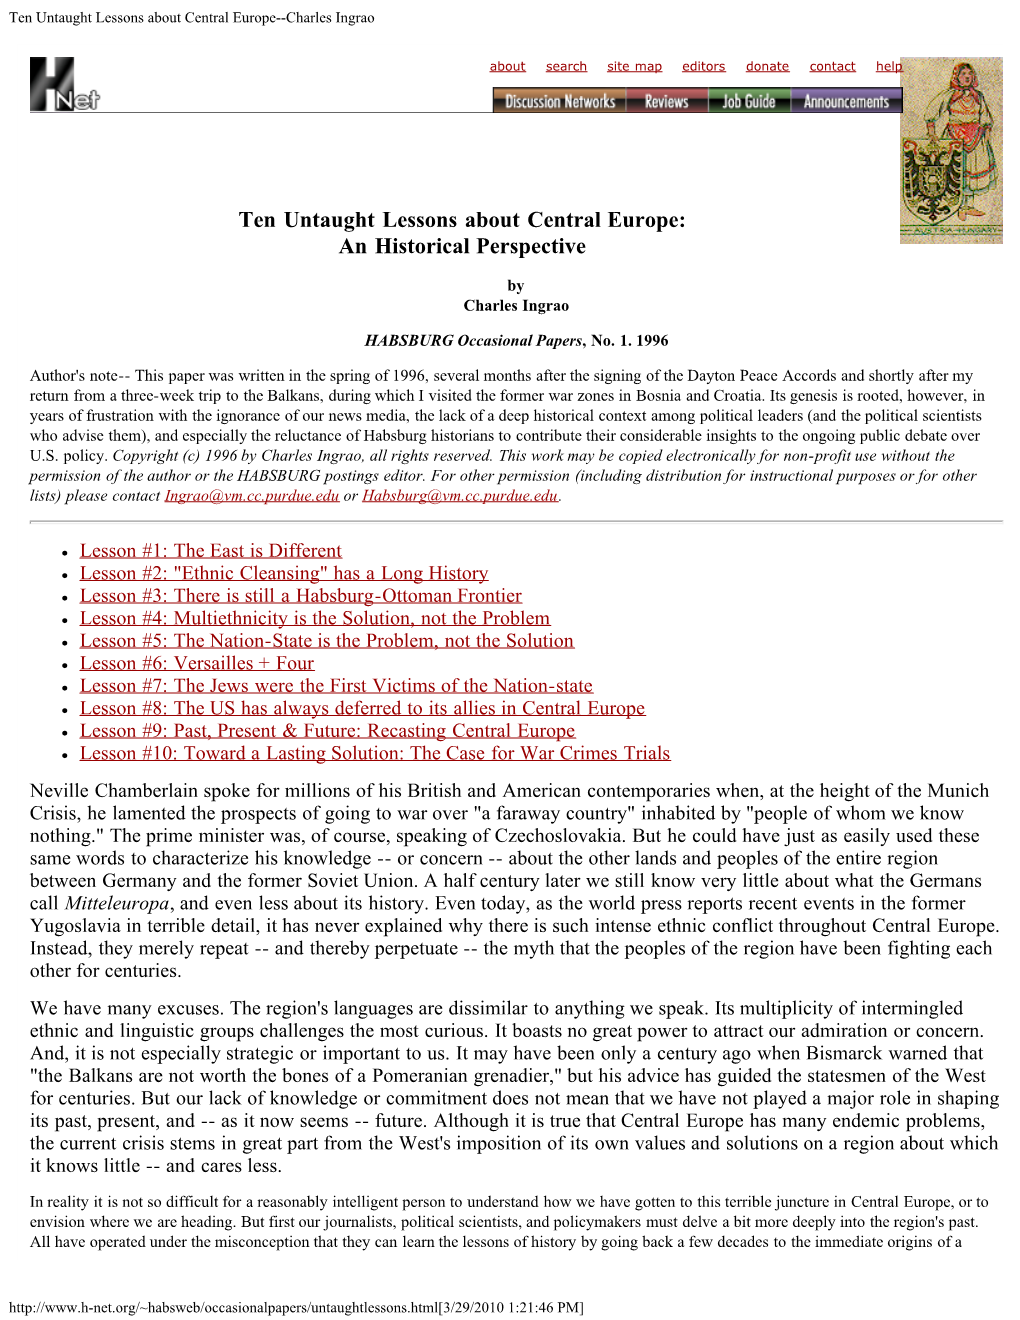 Ten Untaught Lessons About Central Europe--Charles Ingrao